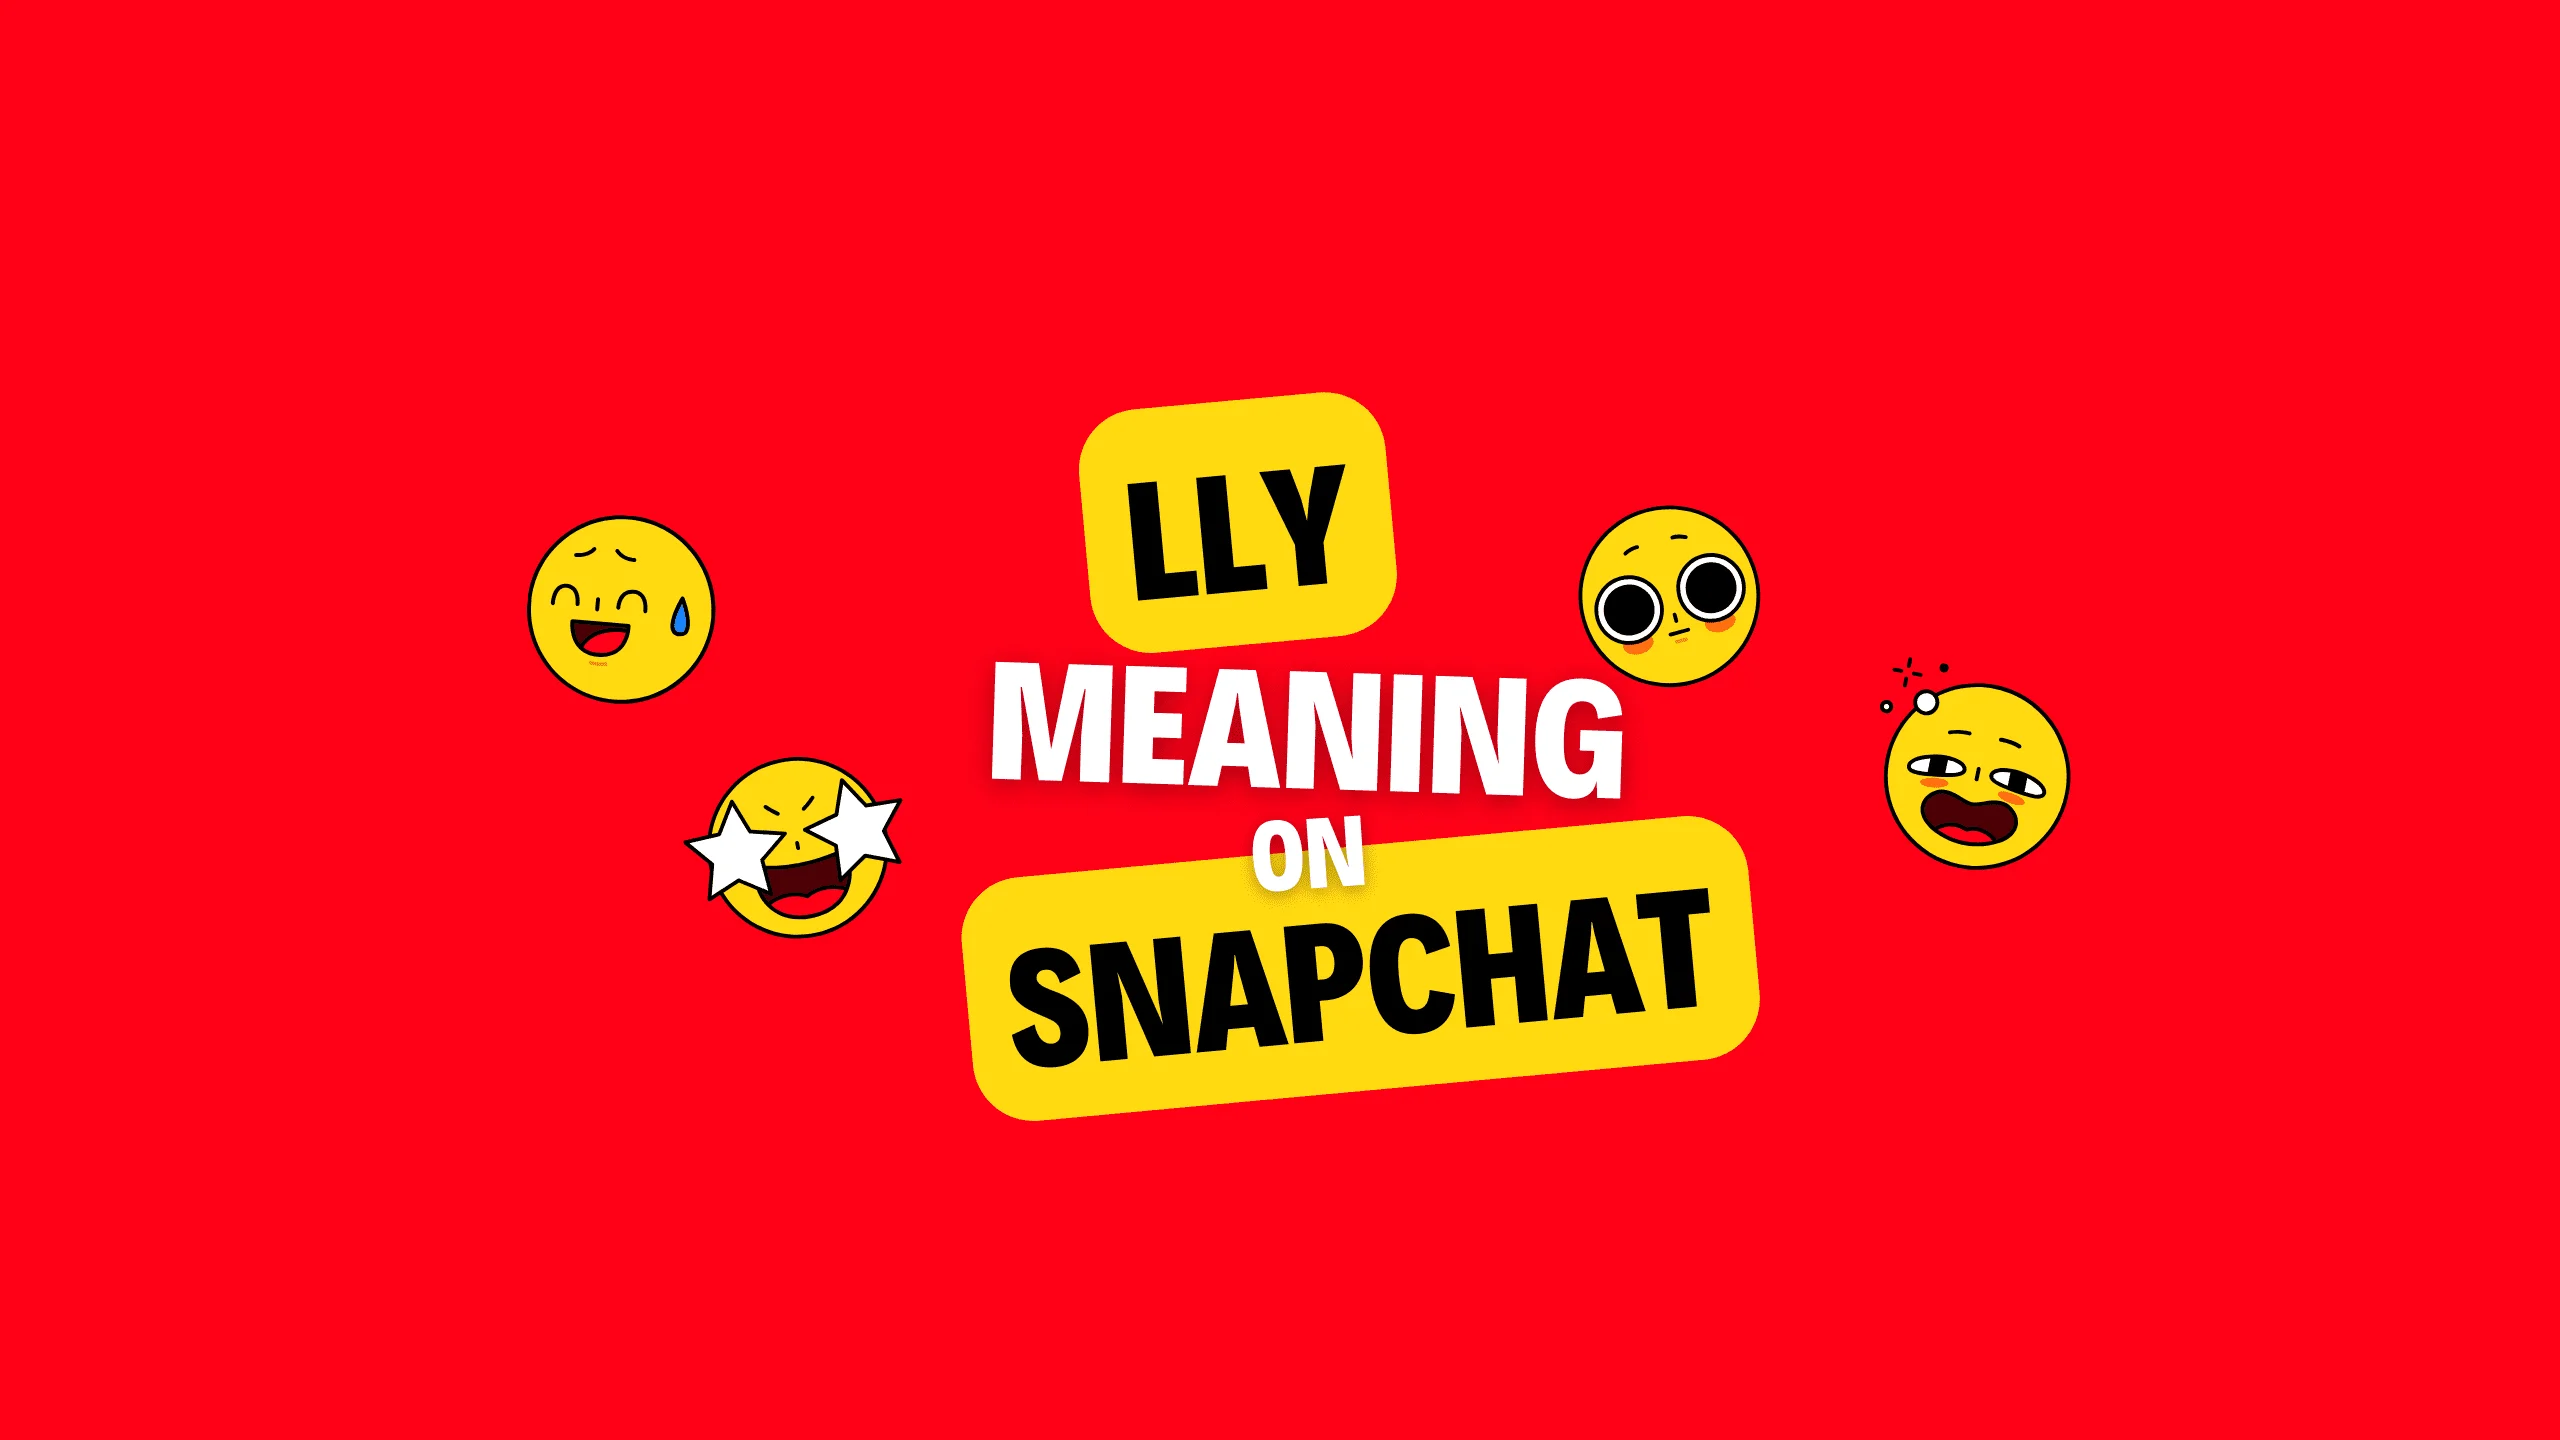 What does LLY mean on Snapchat